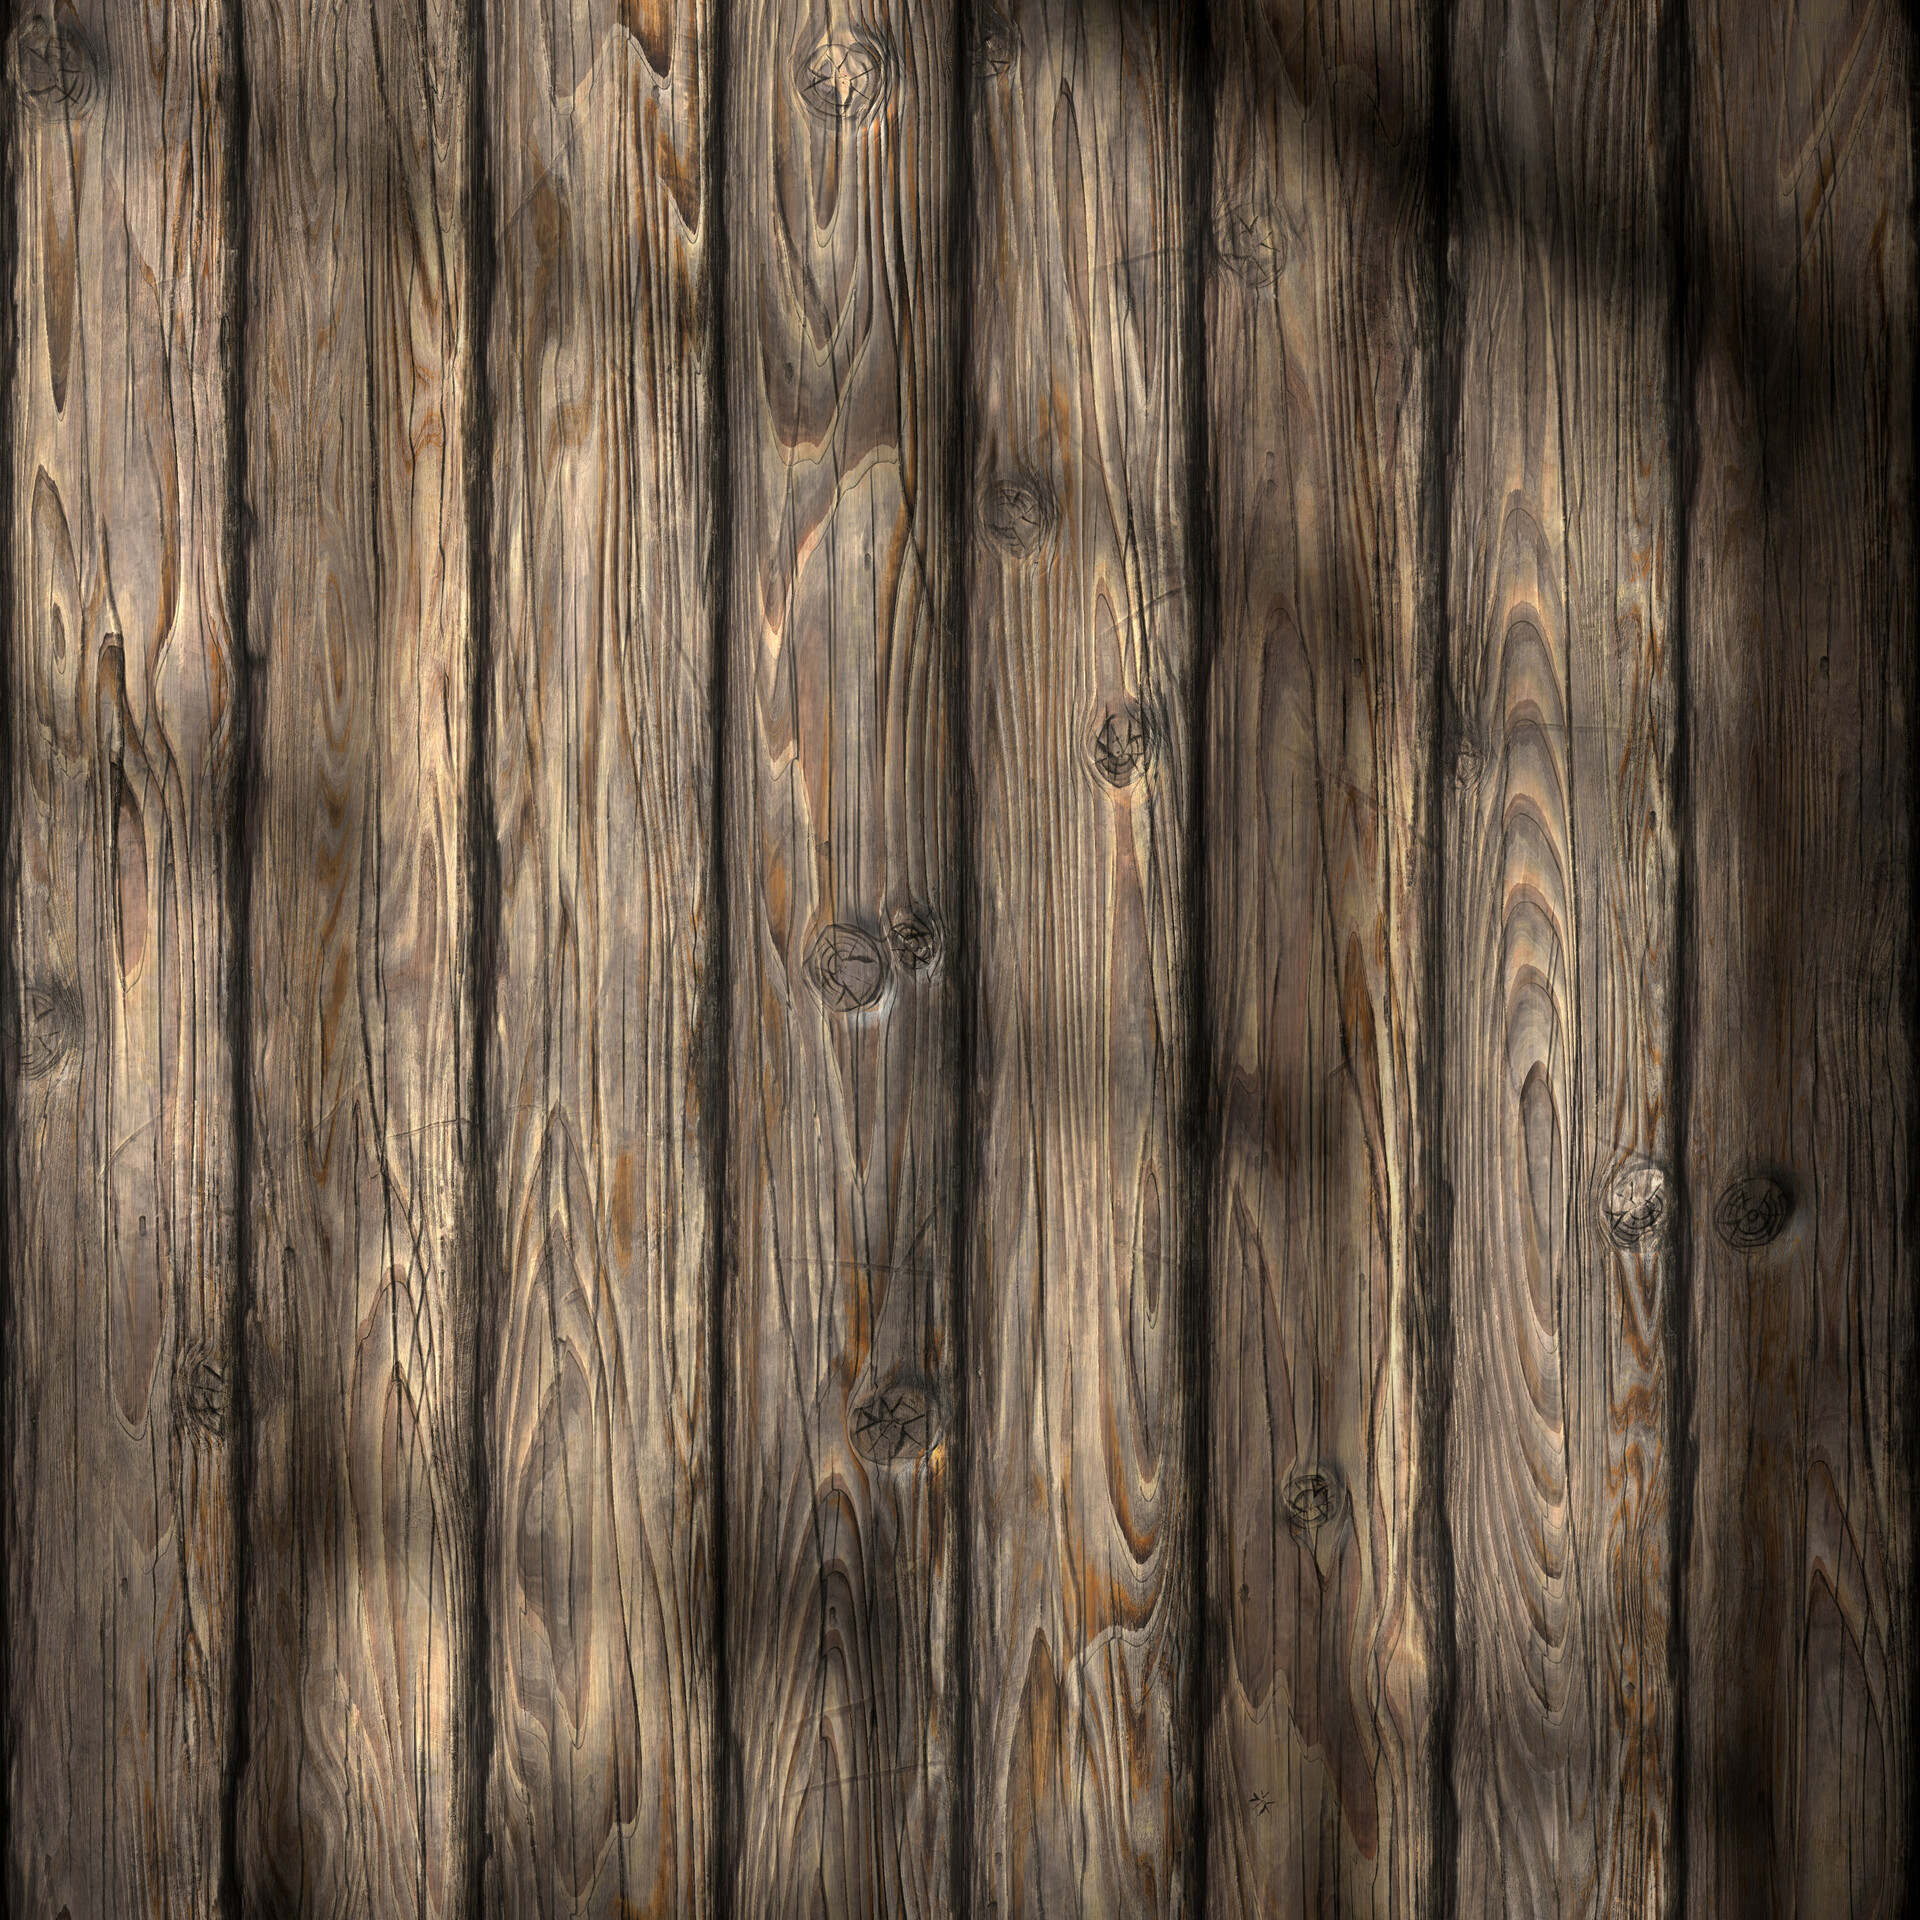 PBR Wood Material Study